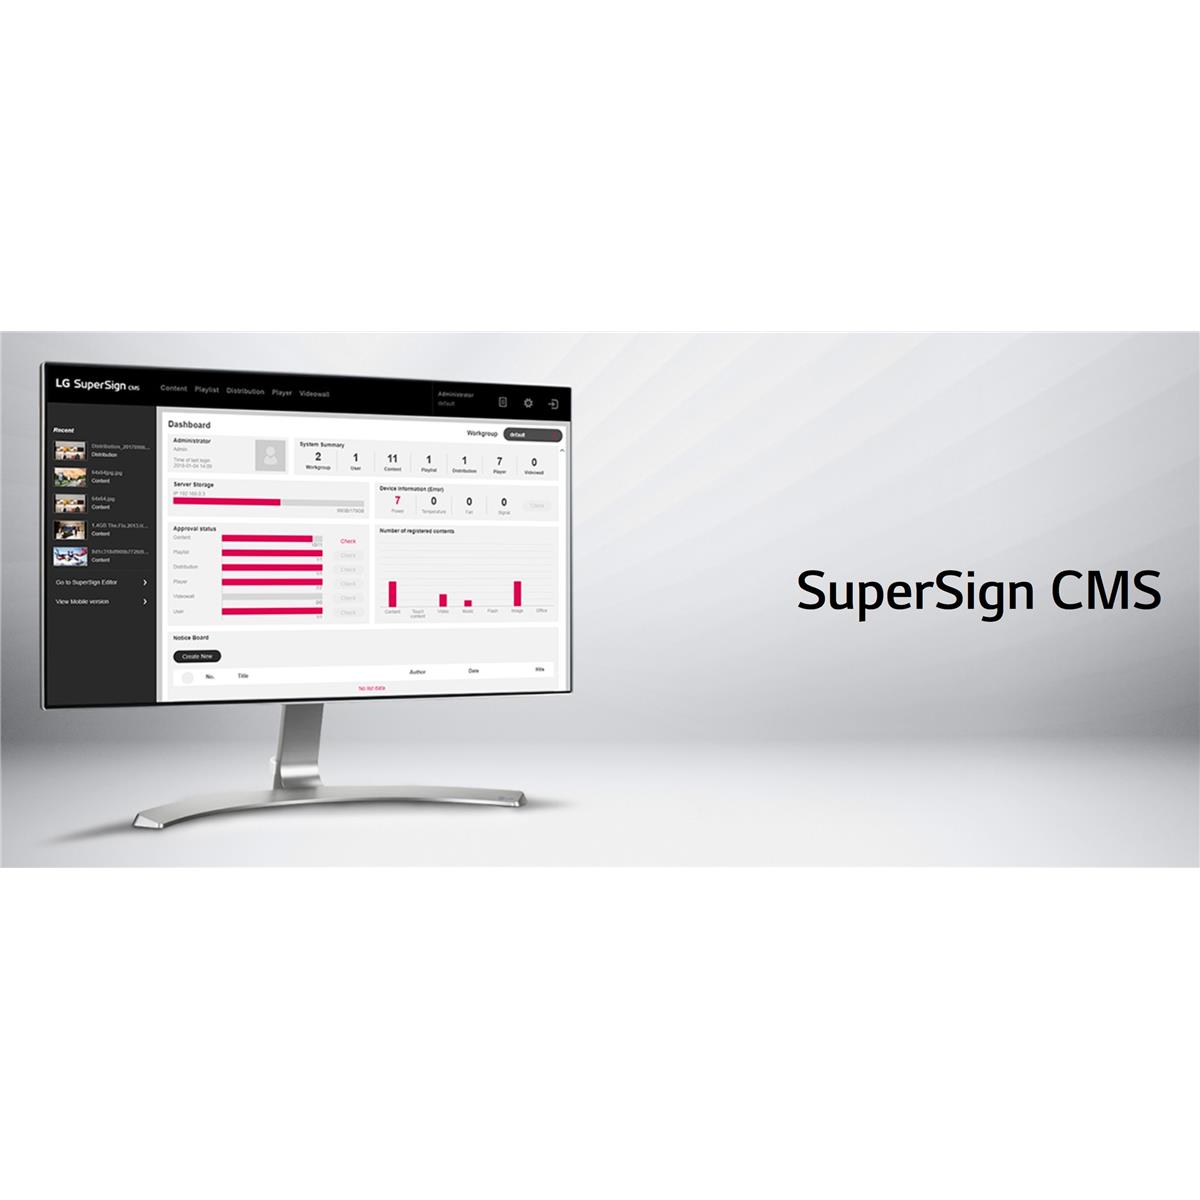 Image of LG SuperSign CMS 4-Year Solution Renewal